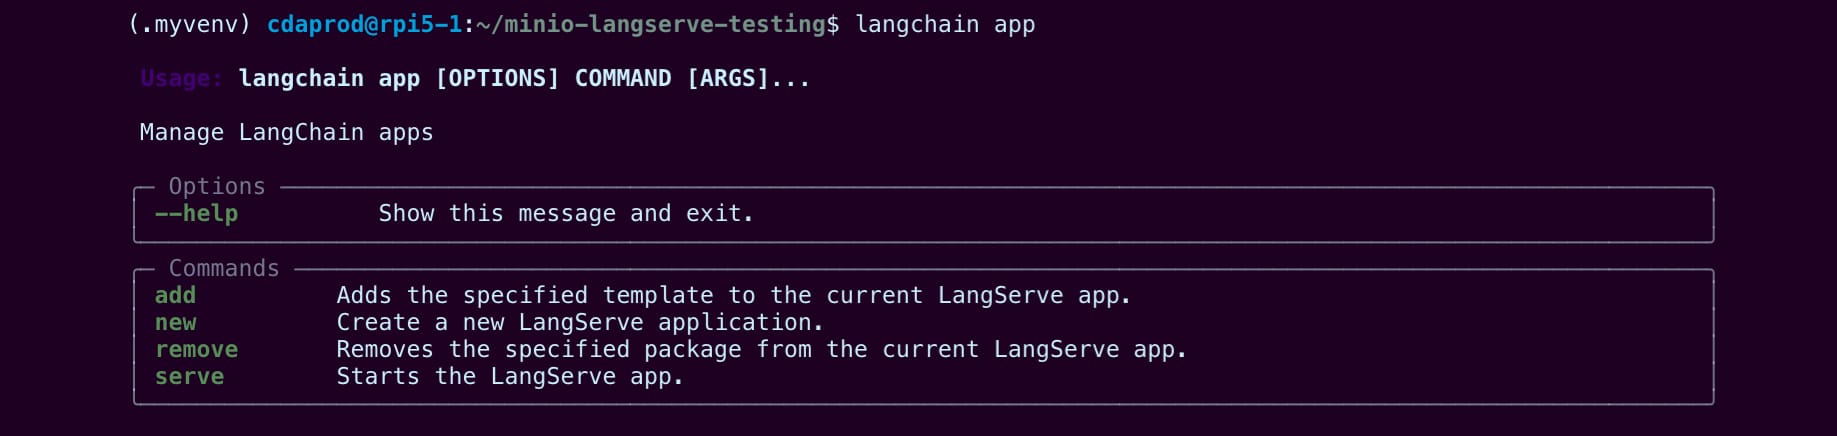 Building and Deploying a MinIO-Powered LangChain Agent API with LangServe